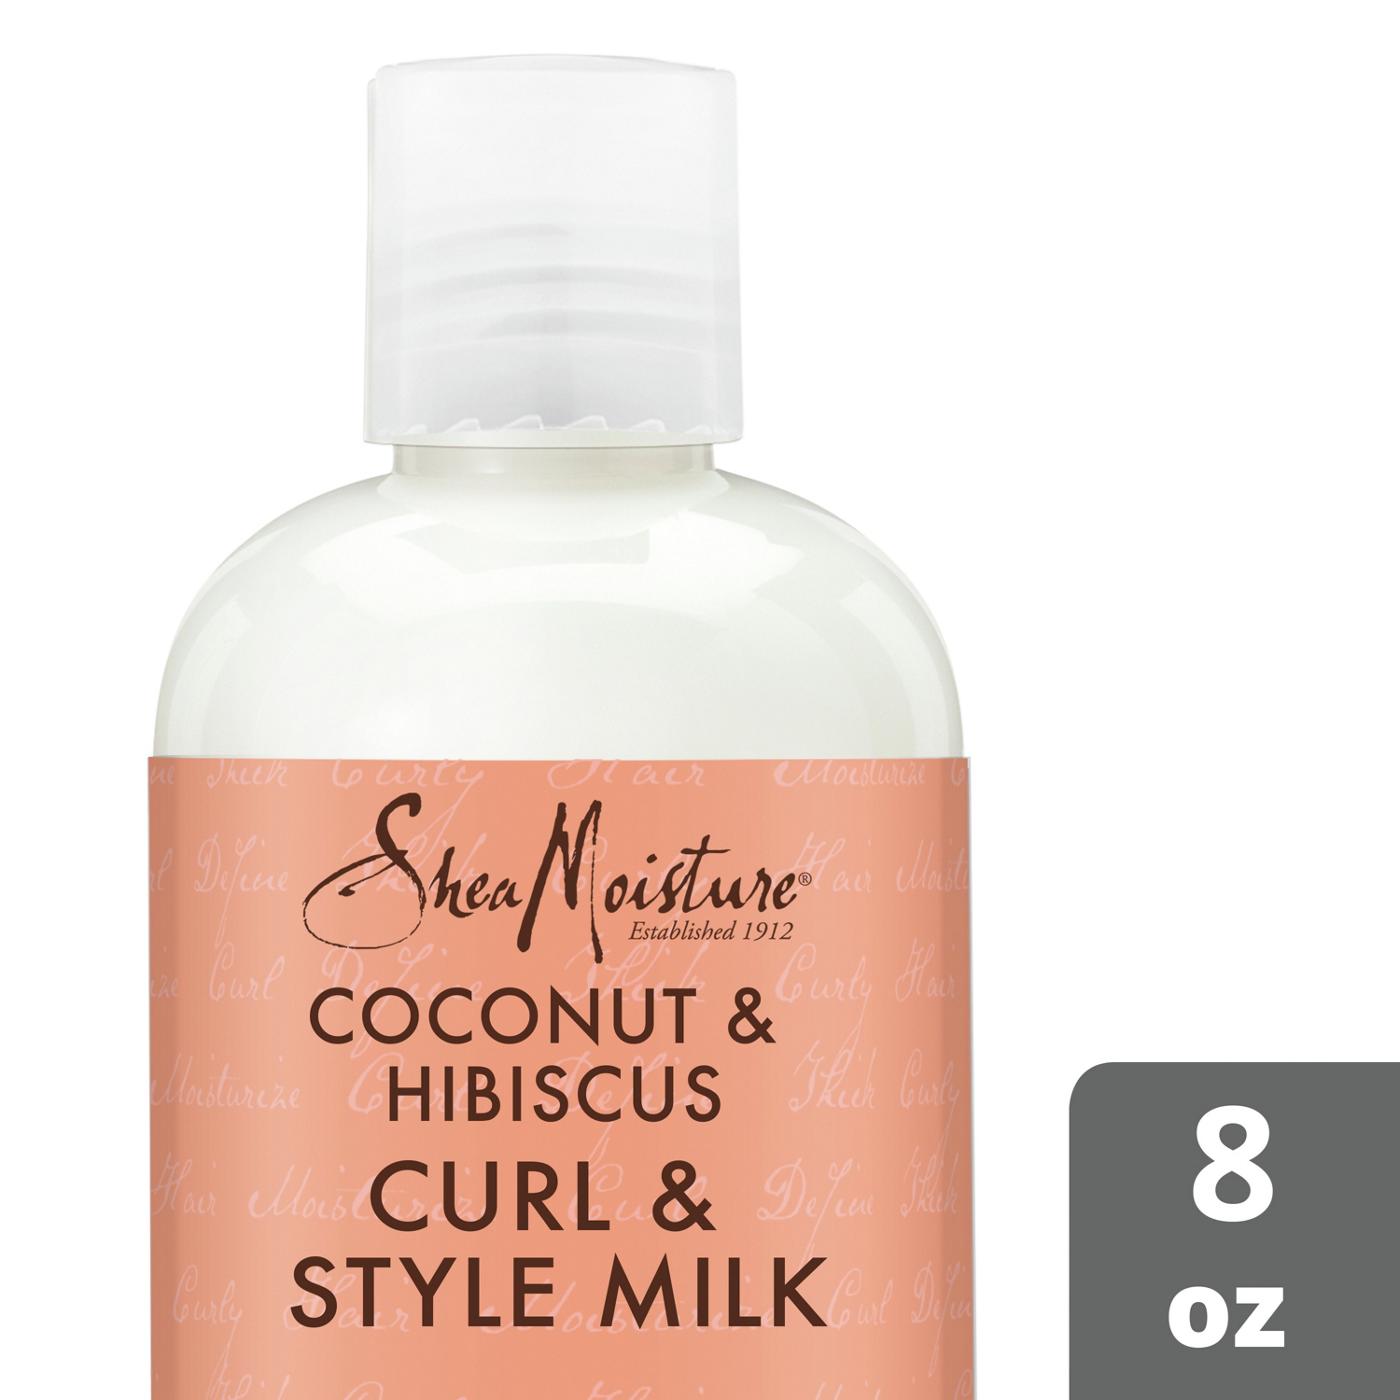 SheaMoisture Coconut & Hibiscus Curl & Style Milk; image 2 of 4